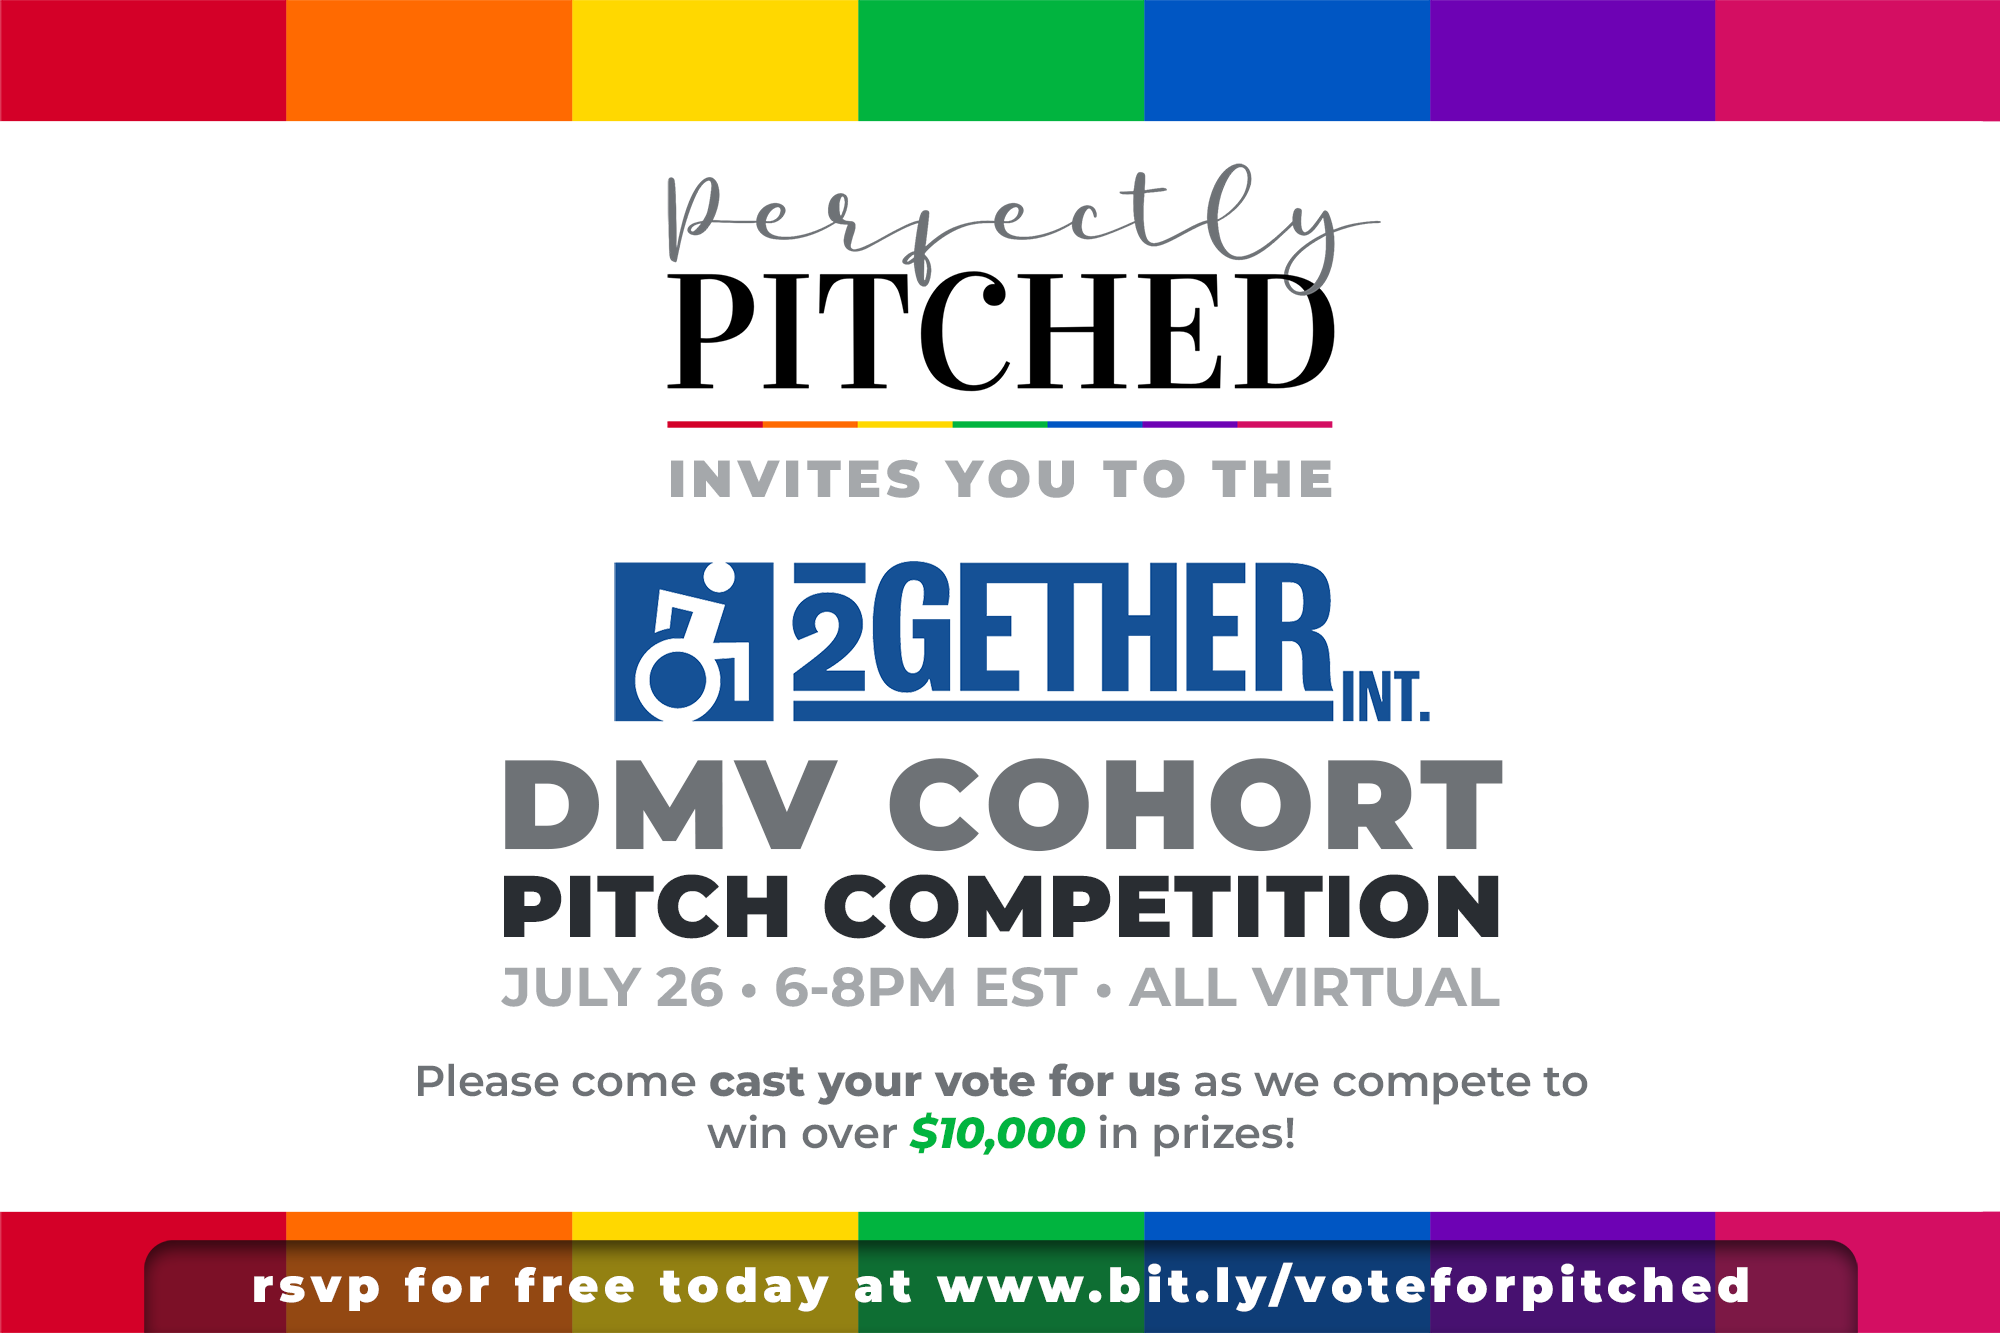 Perfectly Pitched invites you to the 2Gether International DMV Cohort Pitch Competition! July 26, 6-8pm EST, all virtual. Please come cast your vote for us as we compete to win over $10,000 in prizes! RSVP for free today at www.bit.ly/voteforpitched